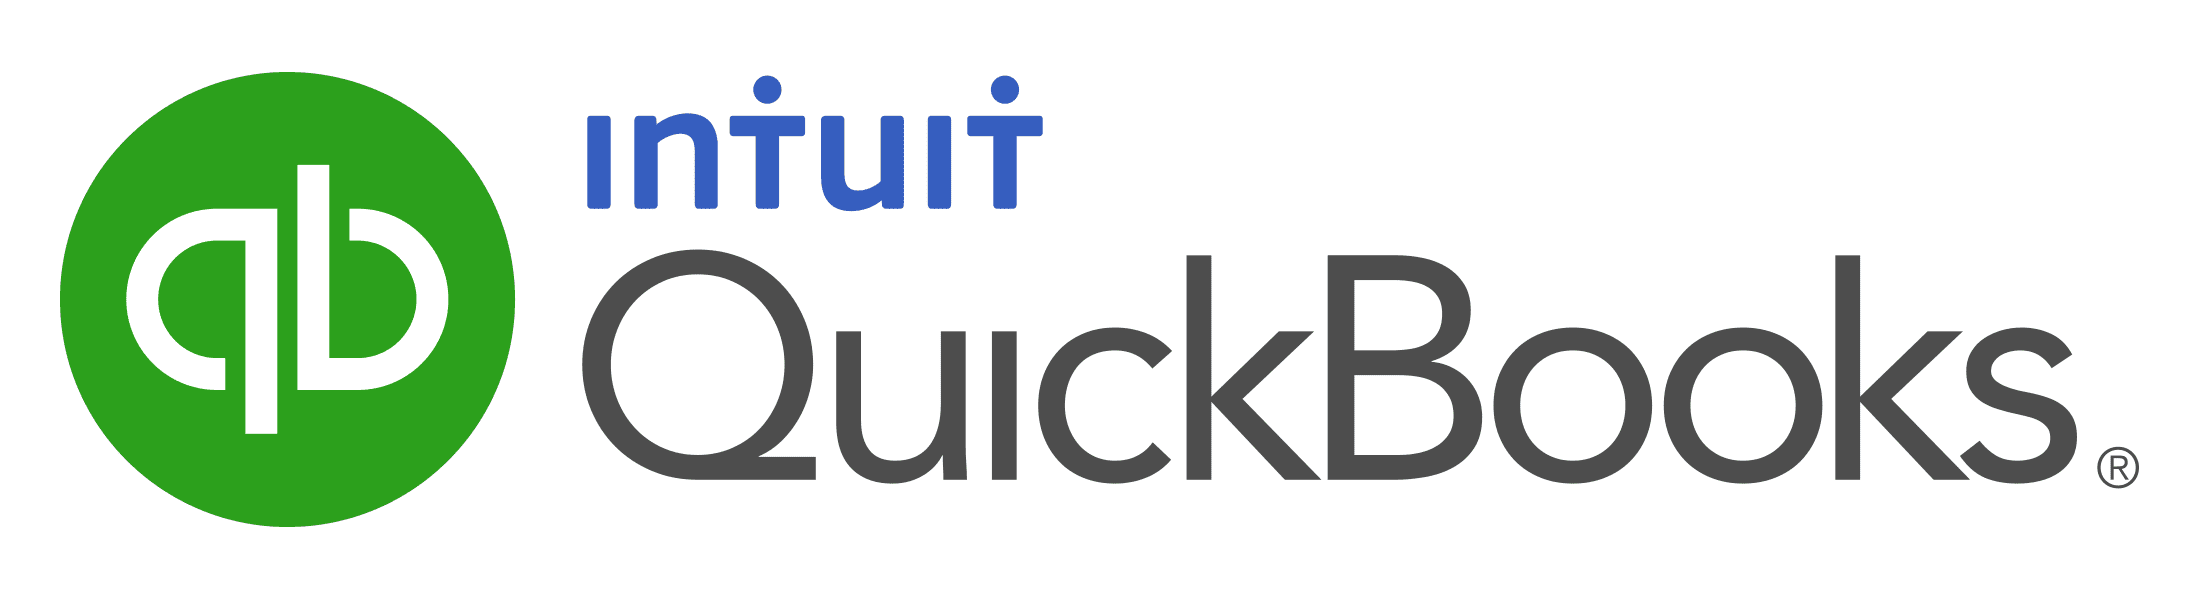 EDI for Intuit Quickbooks solution from SPS Commerce